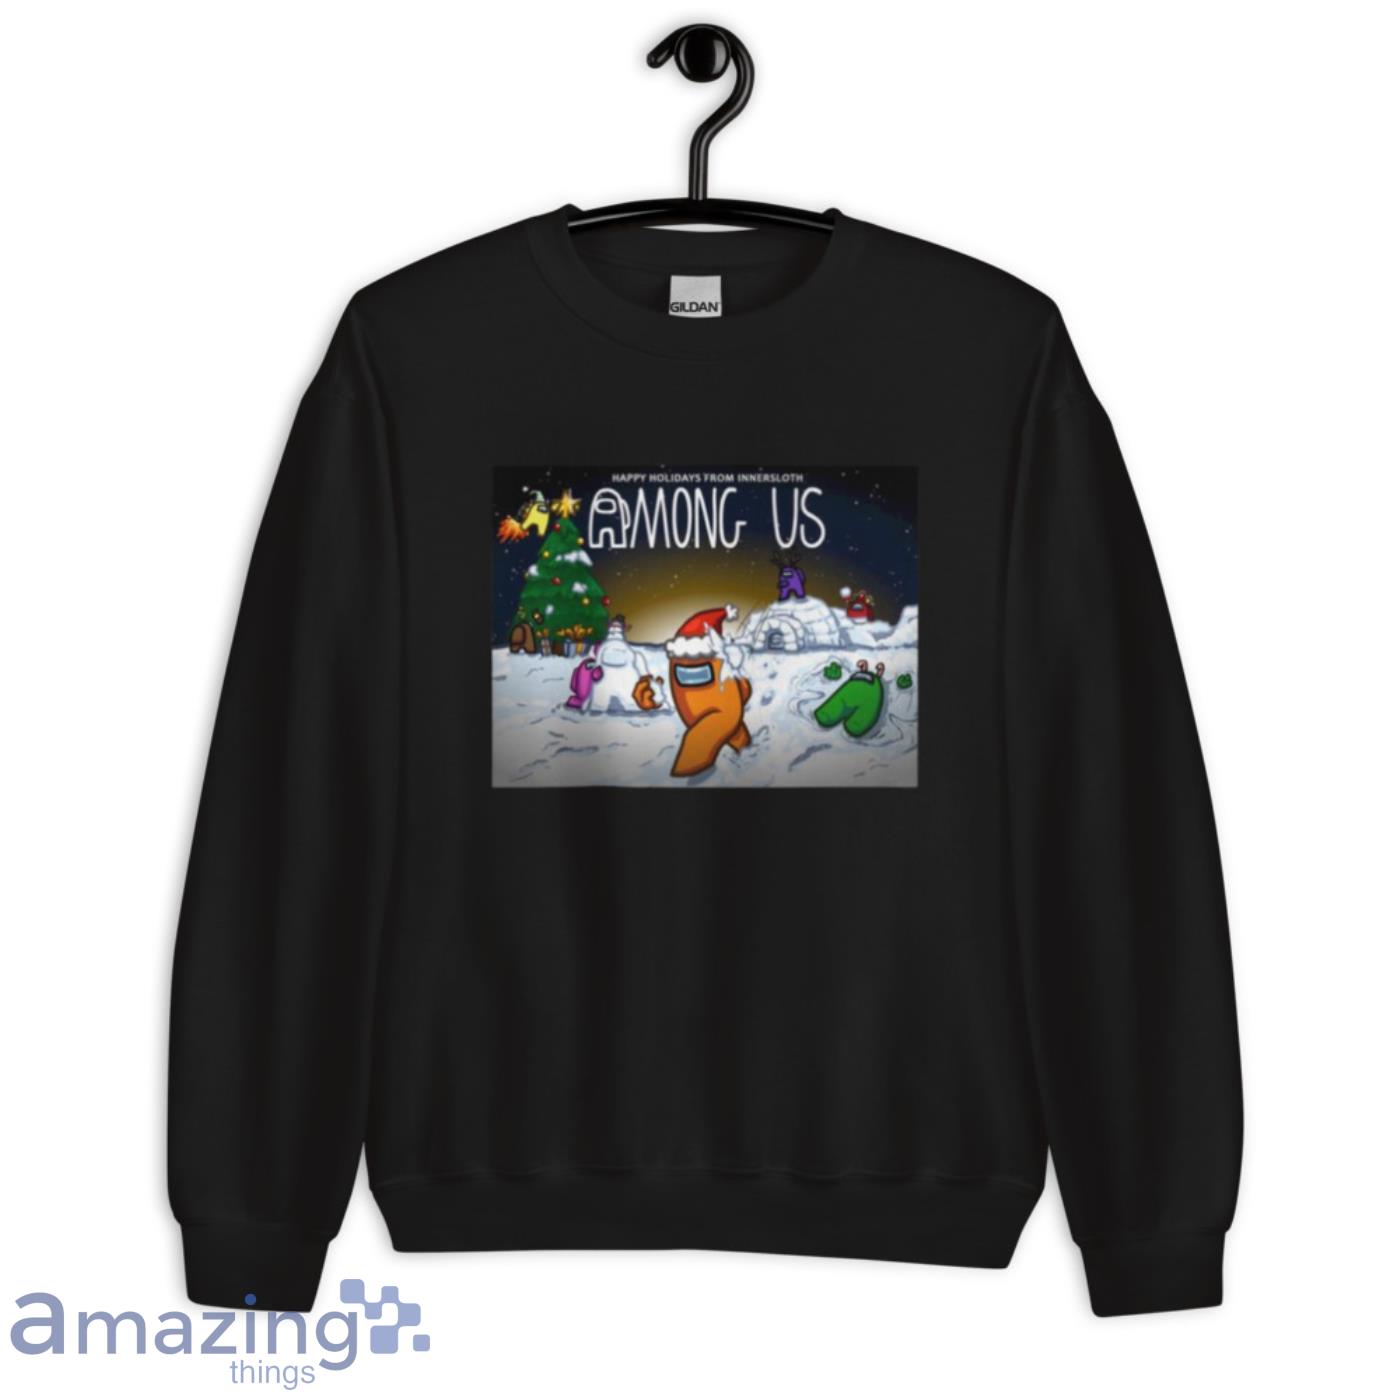 Official Innersloth Merchandise Store - Among Us Merch